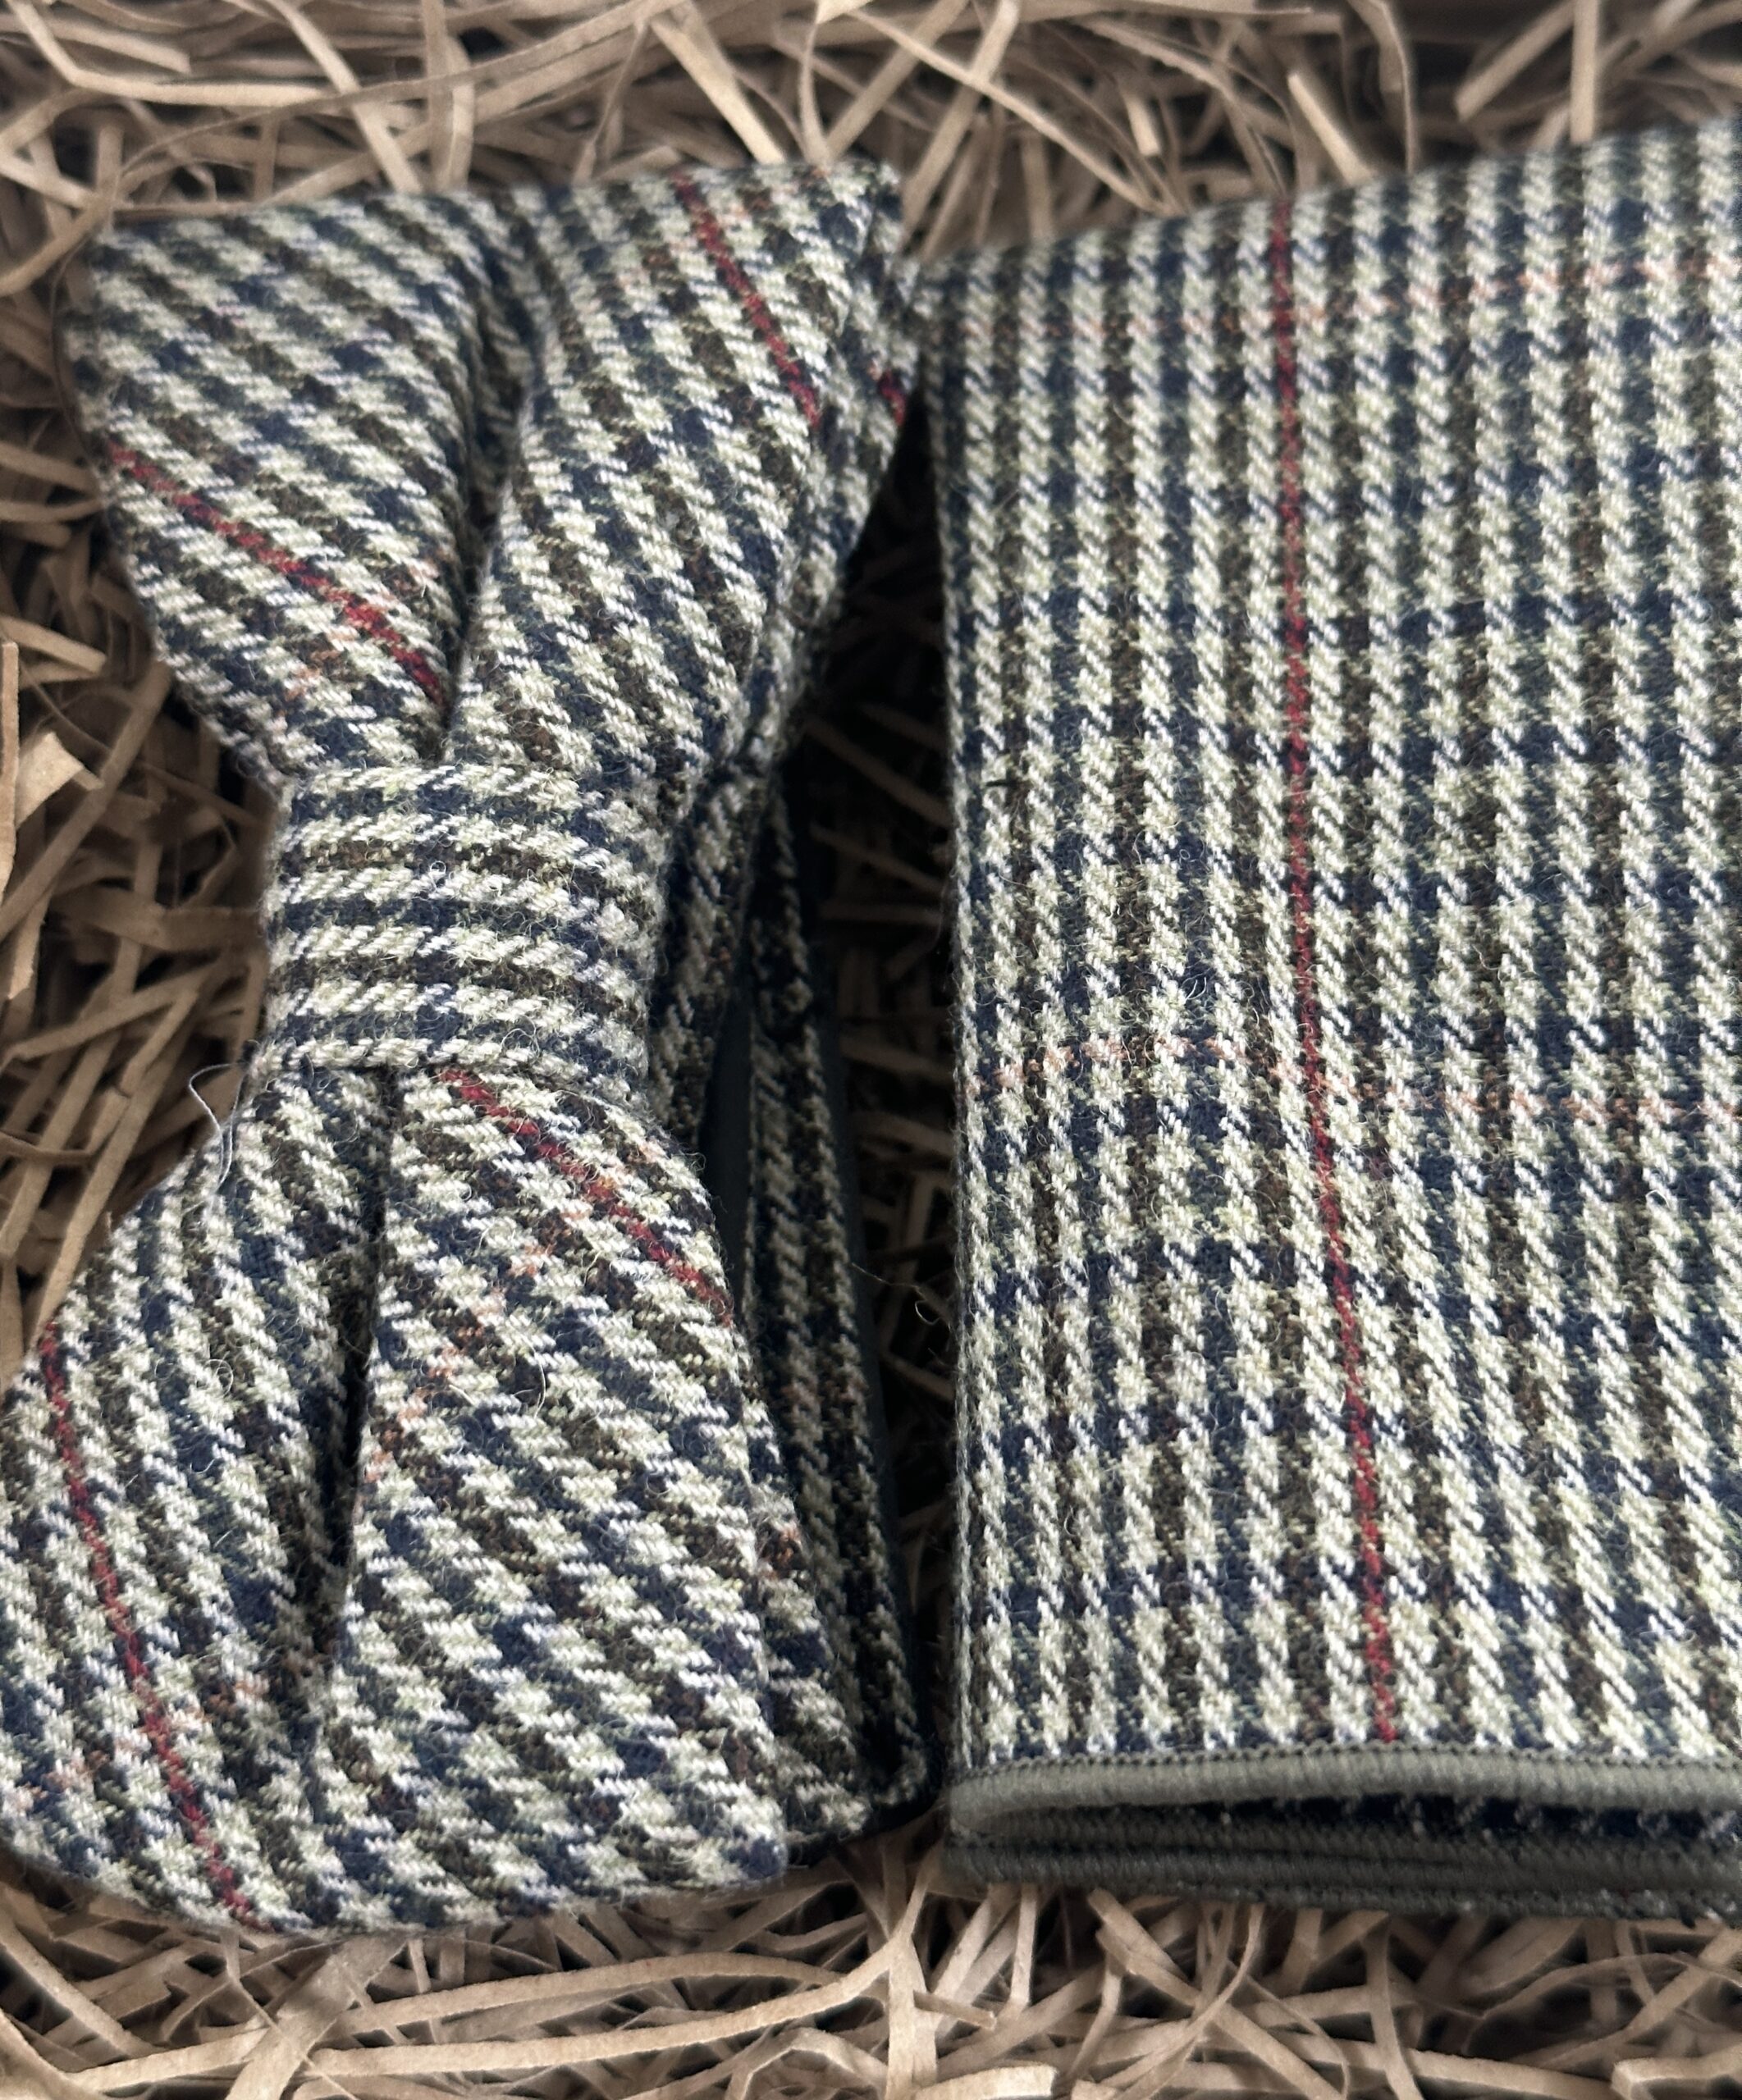 The Ox-Eye Tie and Pocket Square